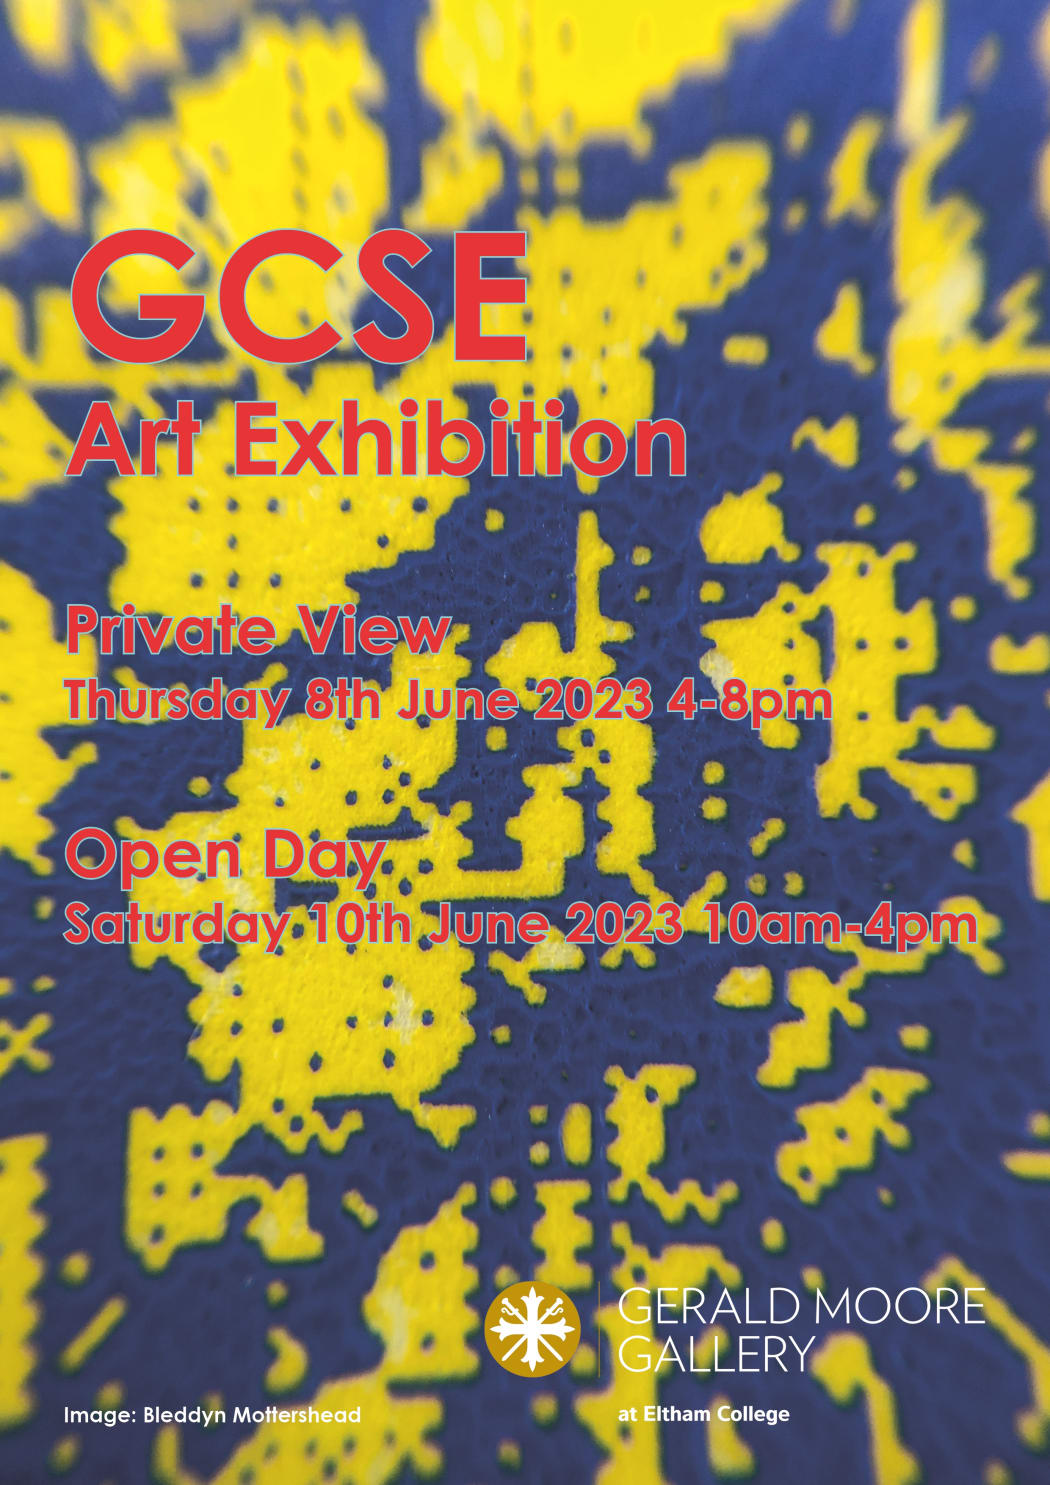 GCSE Art Exhibition by Students at Eltham College